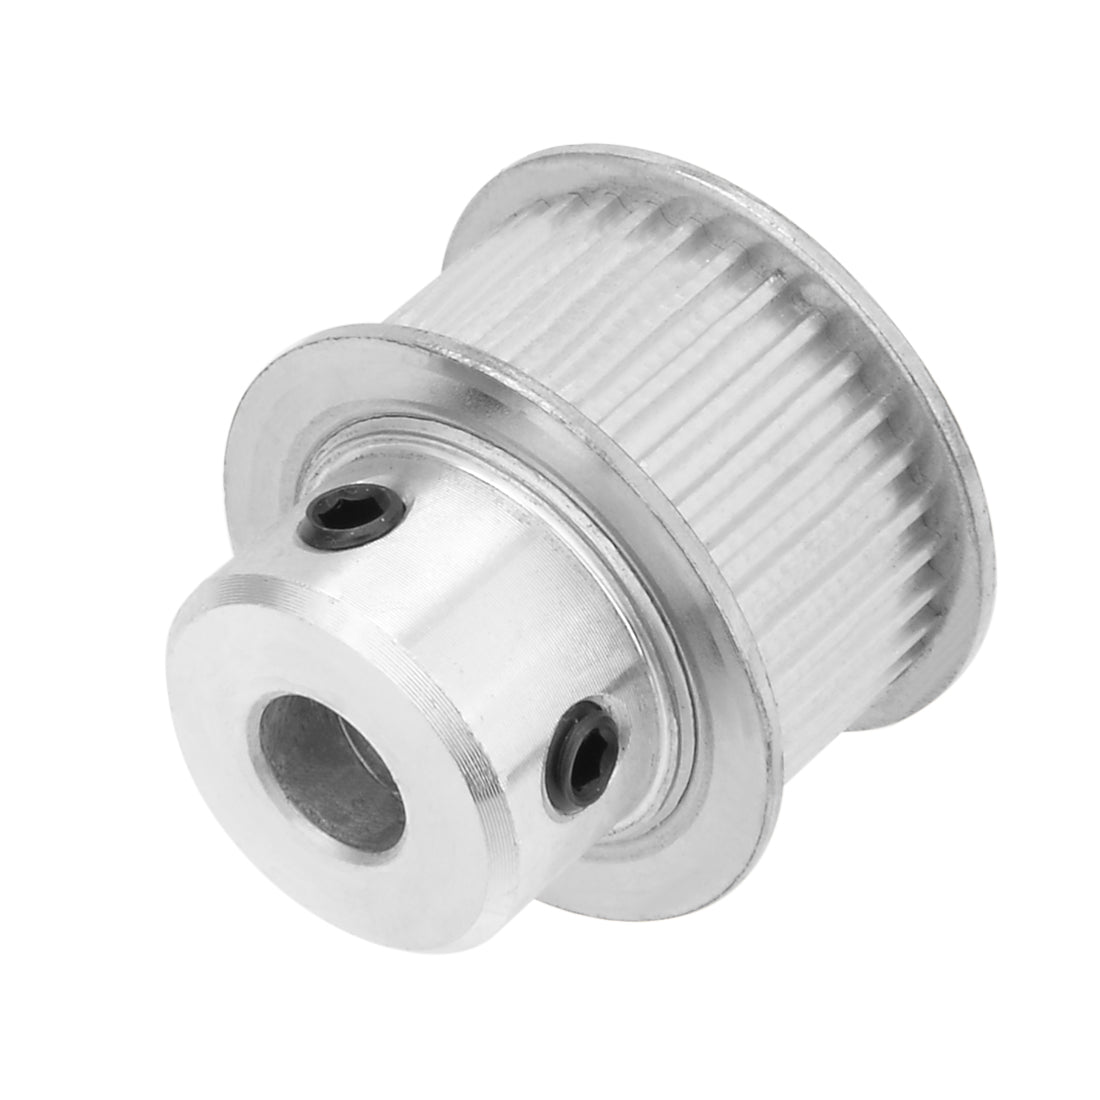 uxcell Uxcell Aluminum  35 Teeth 6.35mm Bore Timing Belt Idler Pulley Synchronous Wheel 10mm Belt for 3D Printer CNC